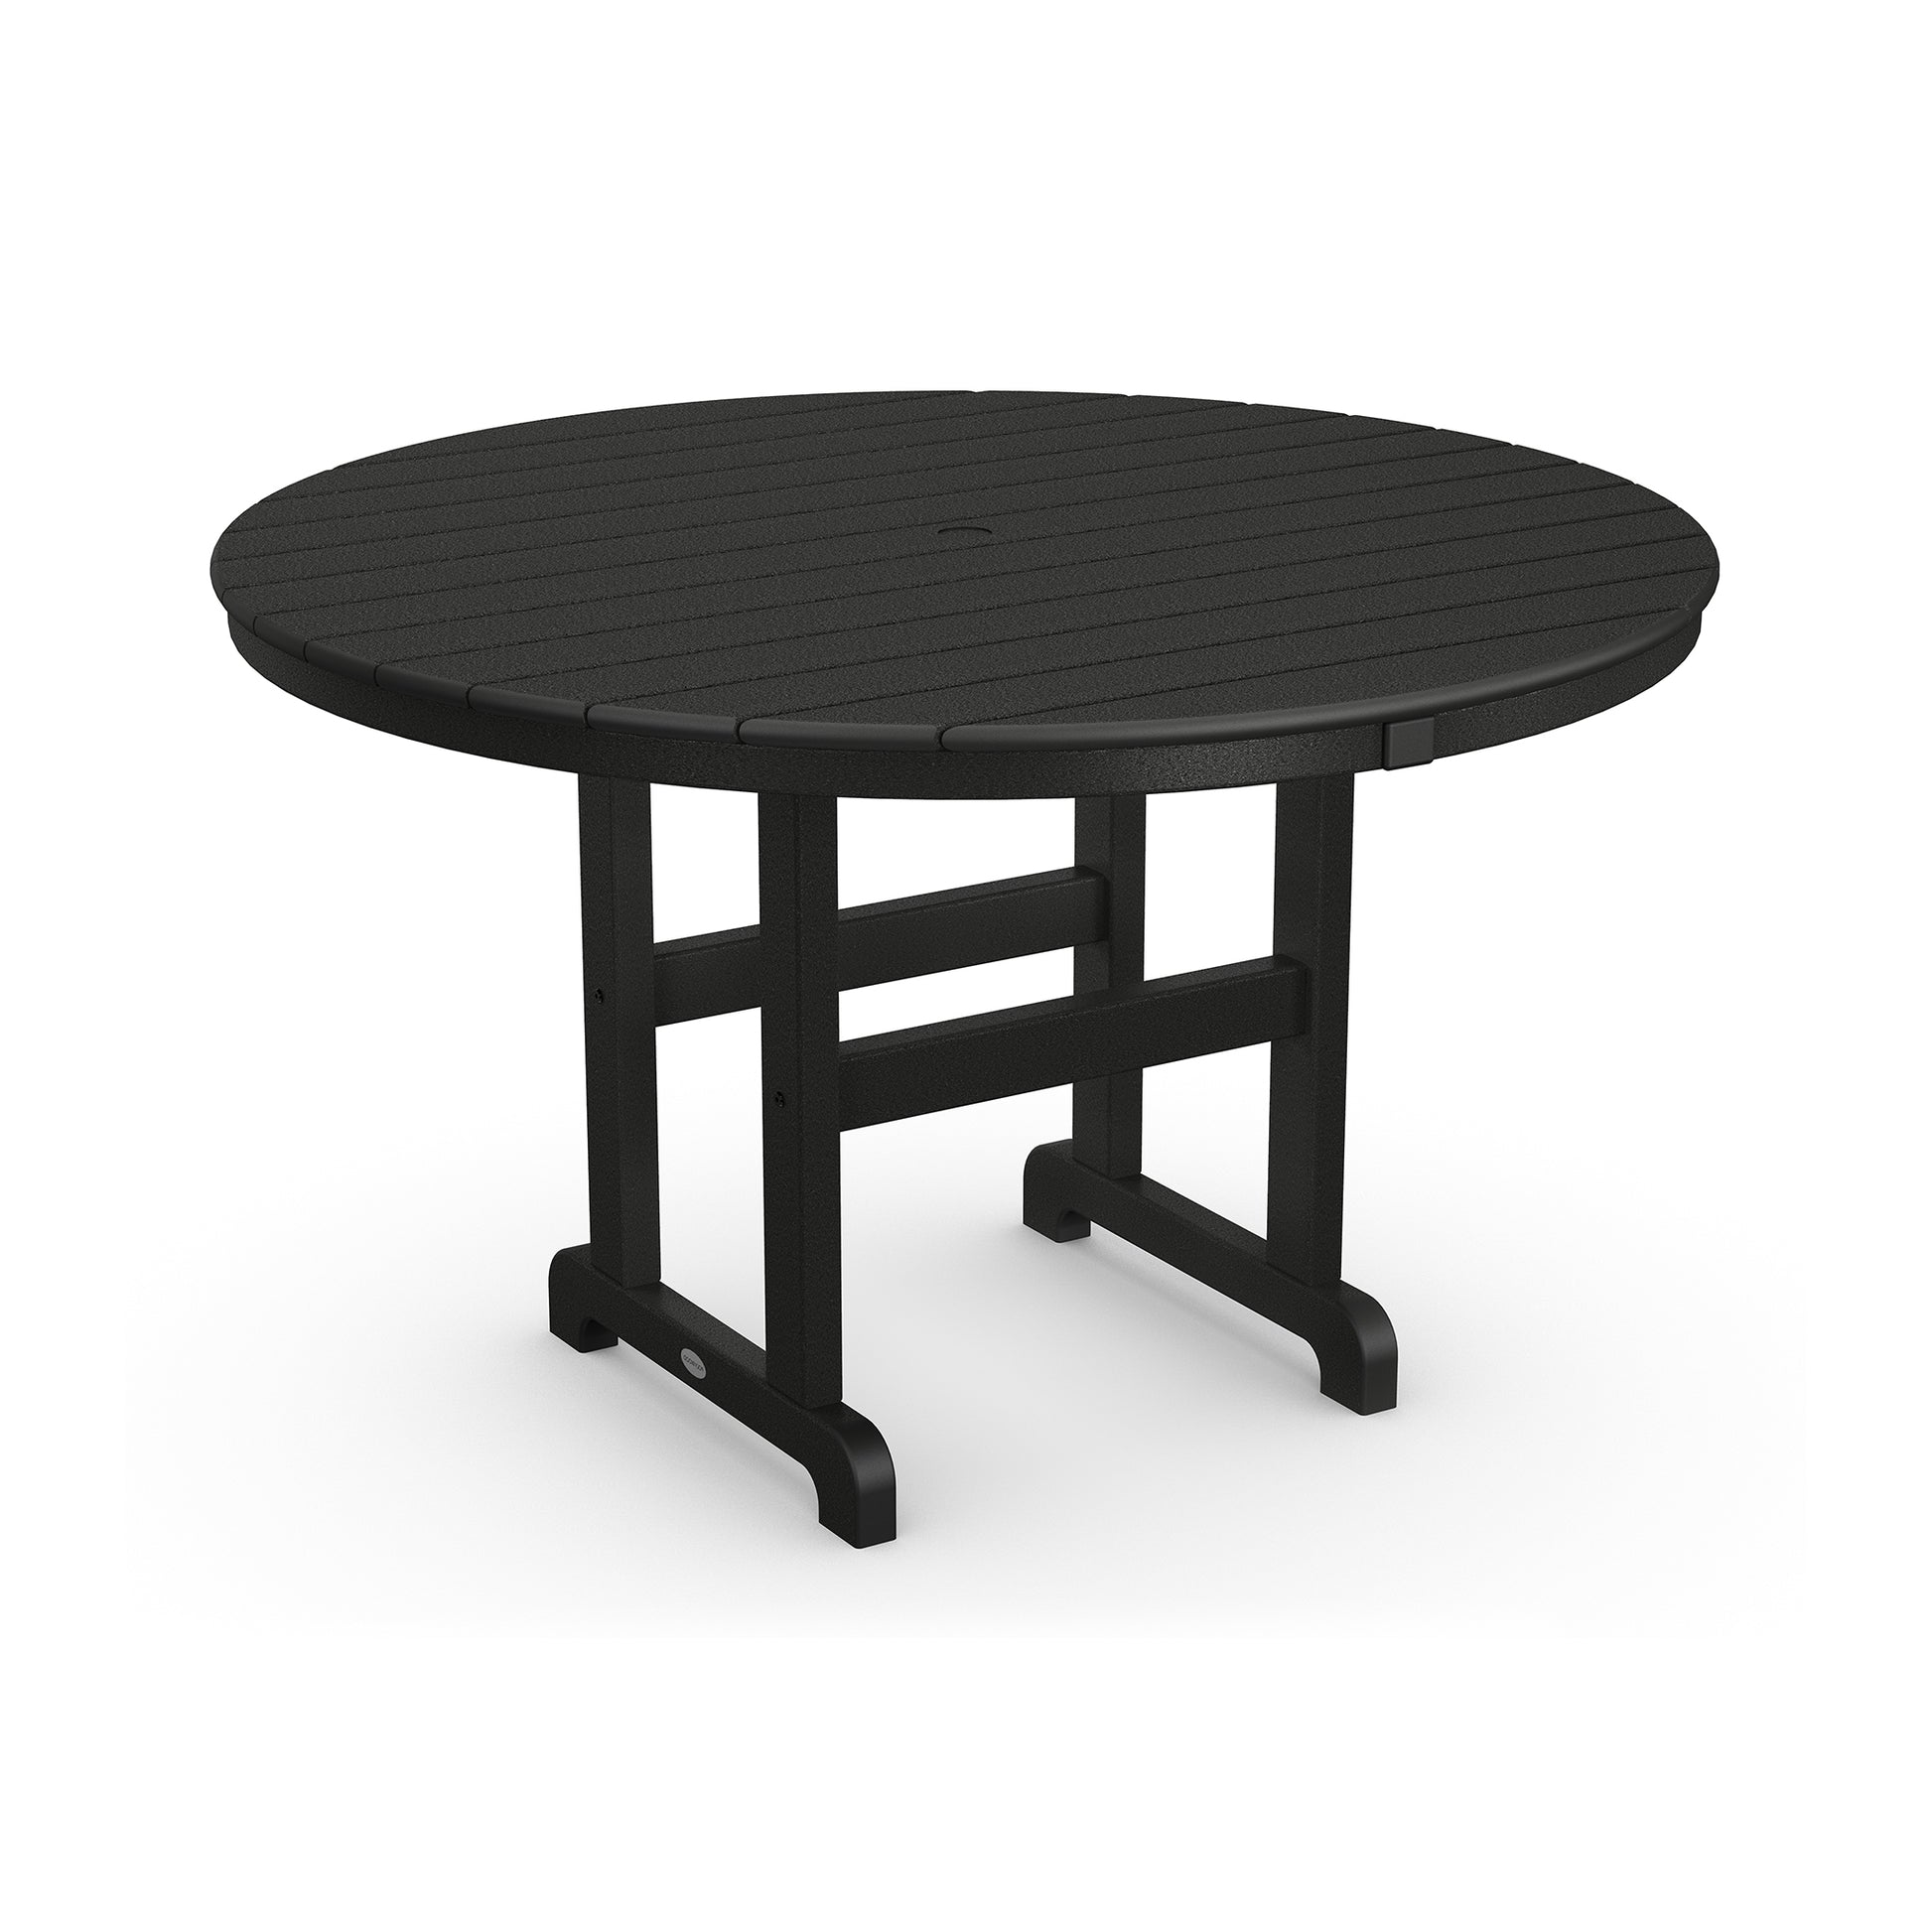 A round, black POLYWOOD® Outdoor 48" Round Dining Table with a slatted top and sturdy legs on a plain white background.